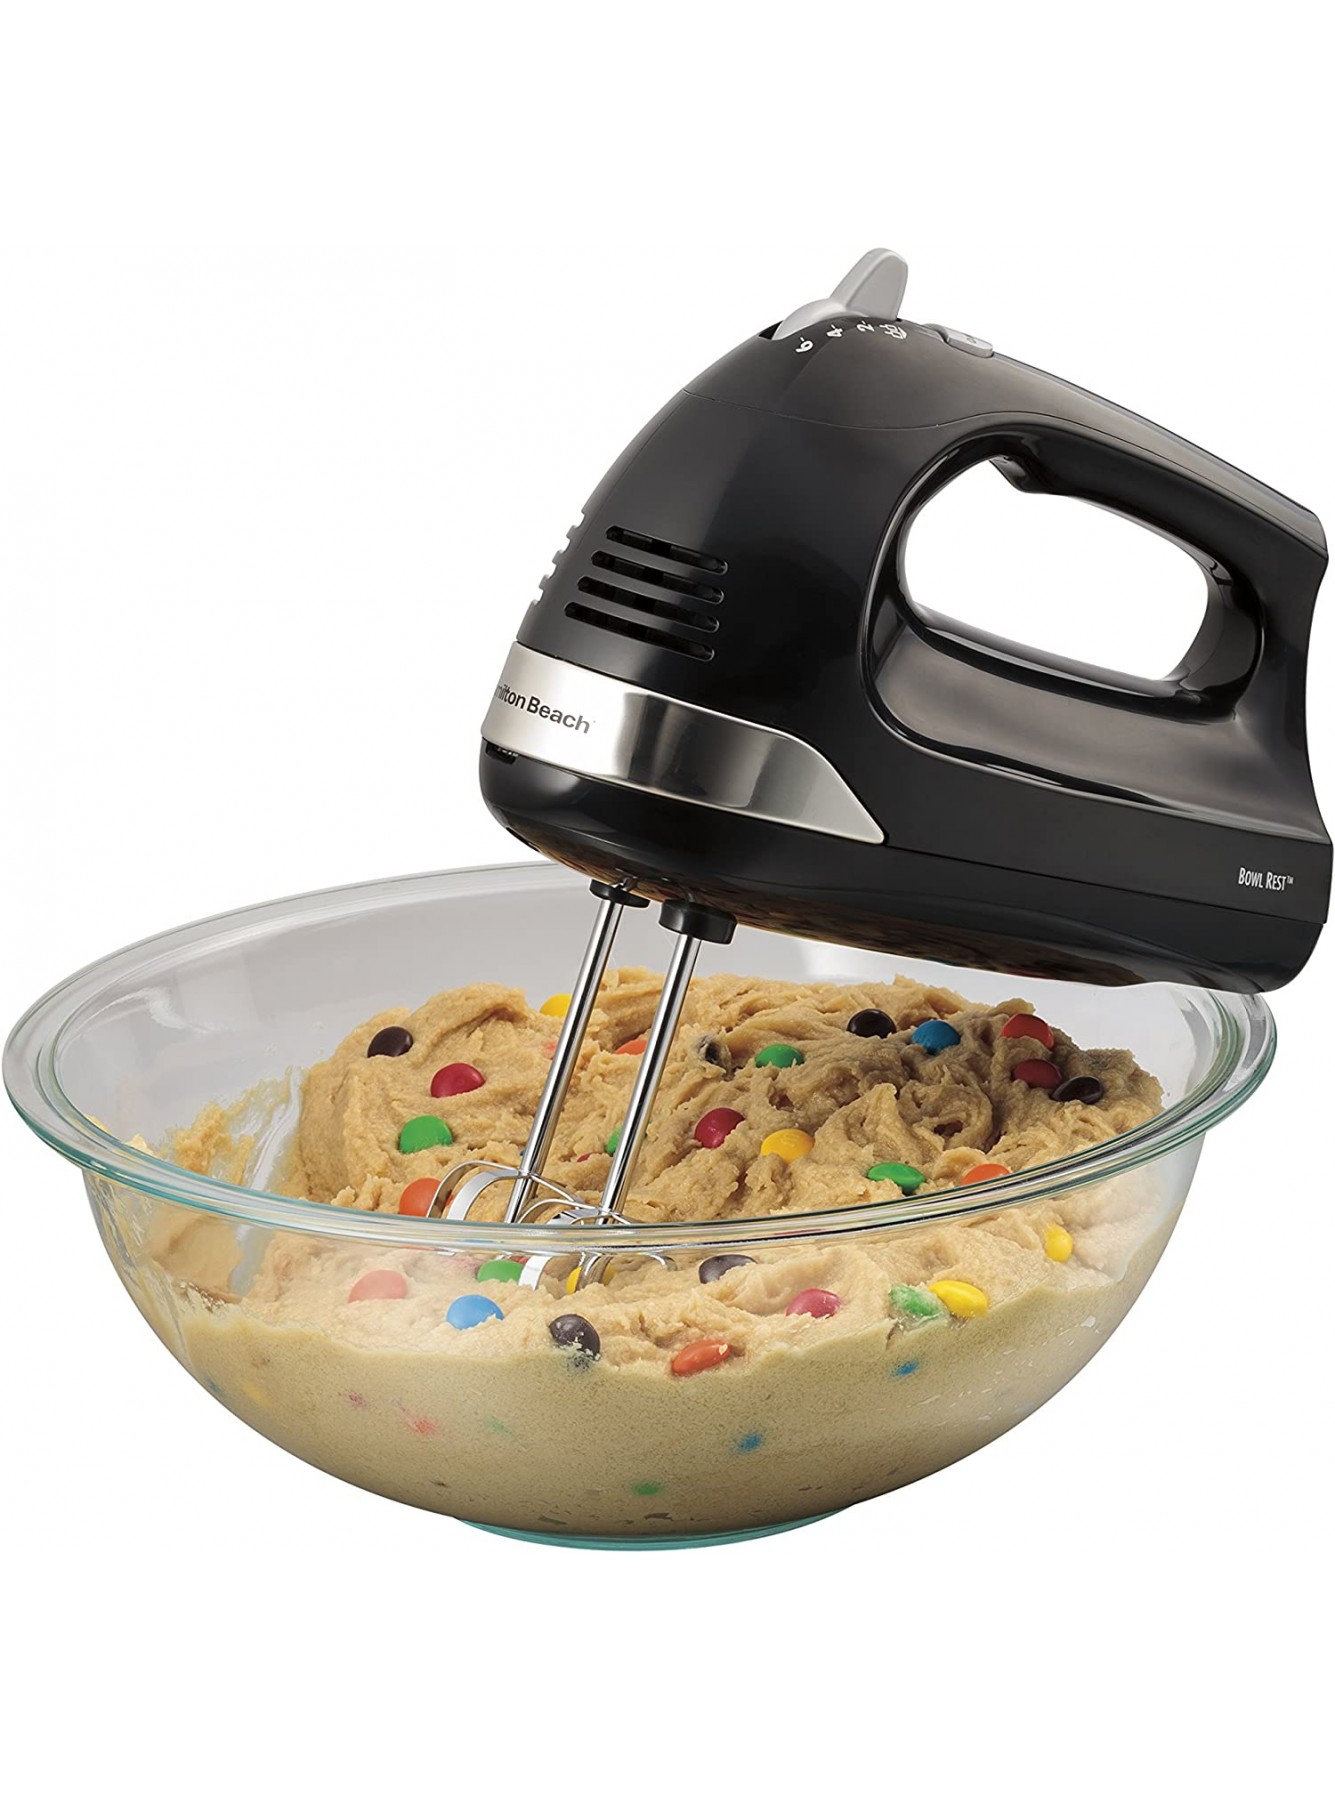 Hamilton Beach 6-Speed Electric Hand Mixer with Snap-On Storage Case QuickBurst Beaters Whisk and Bowl Rest Black B01M7NFX3N